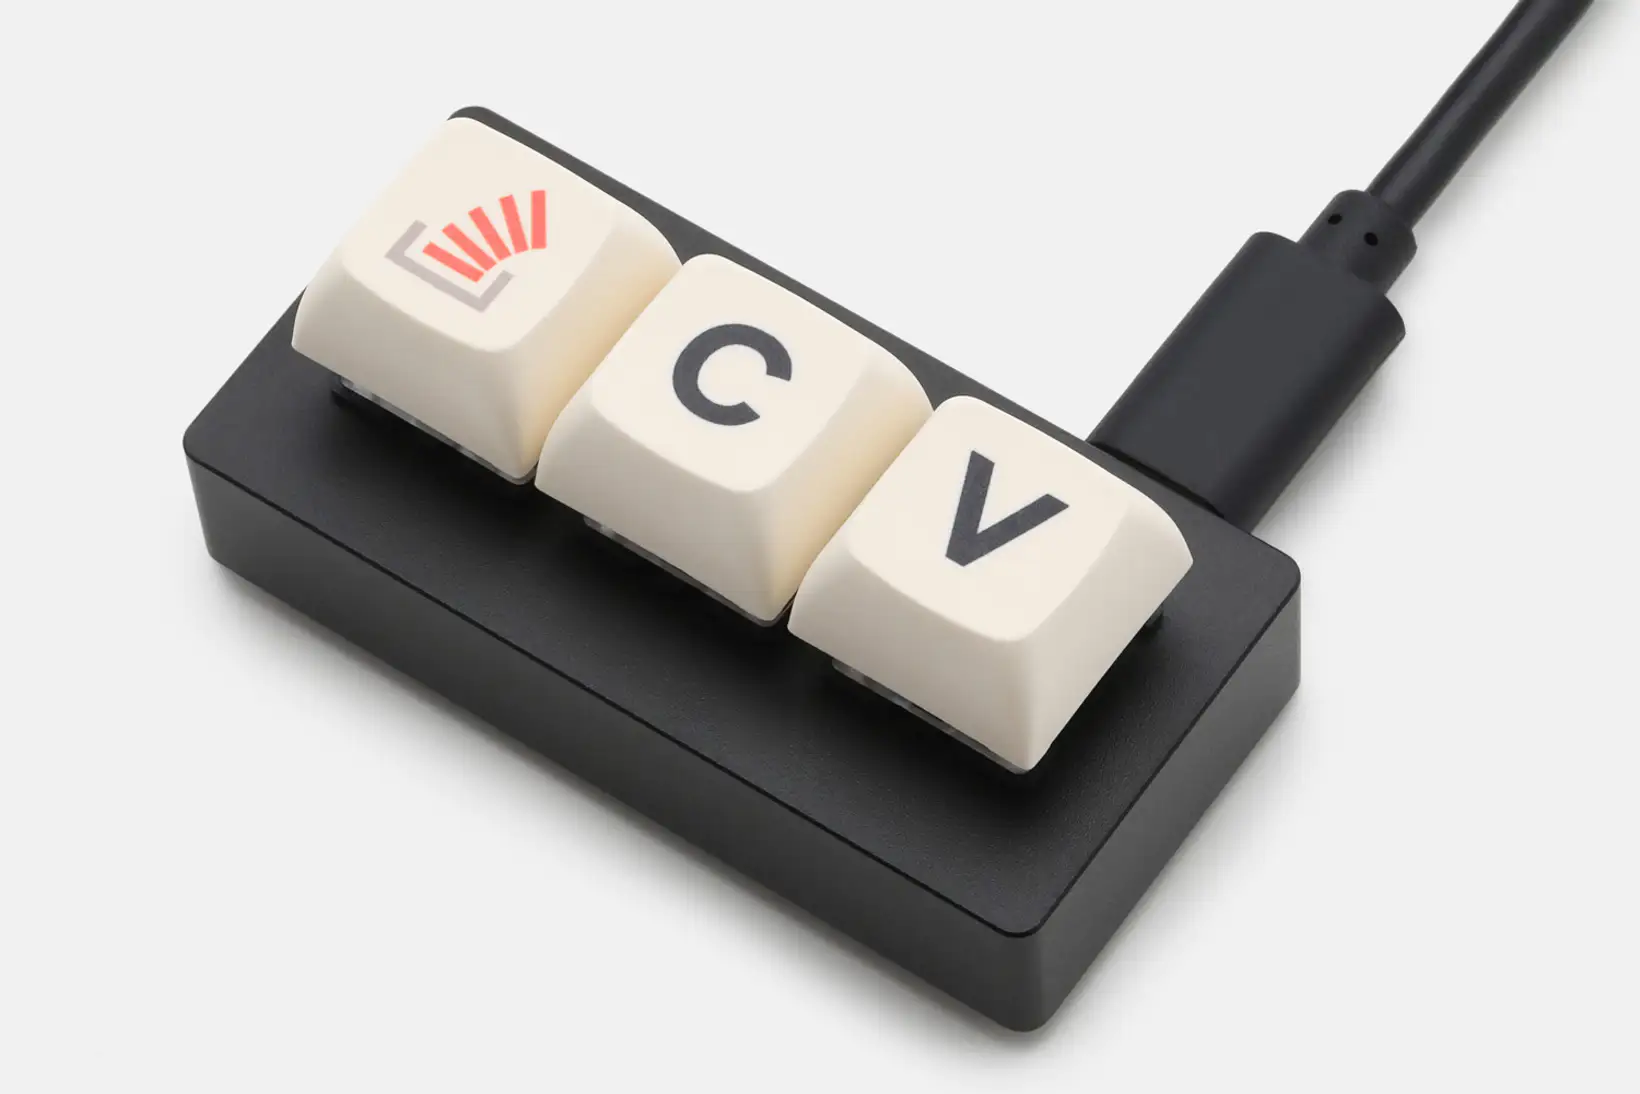 keyboard with only Ctrl, C, and V